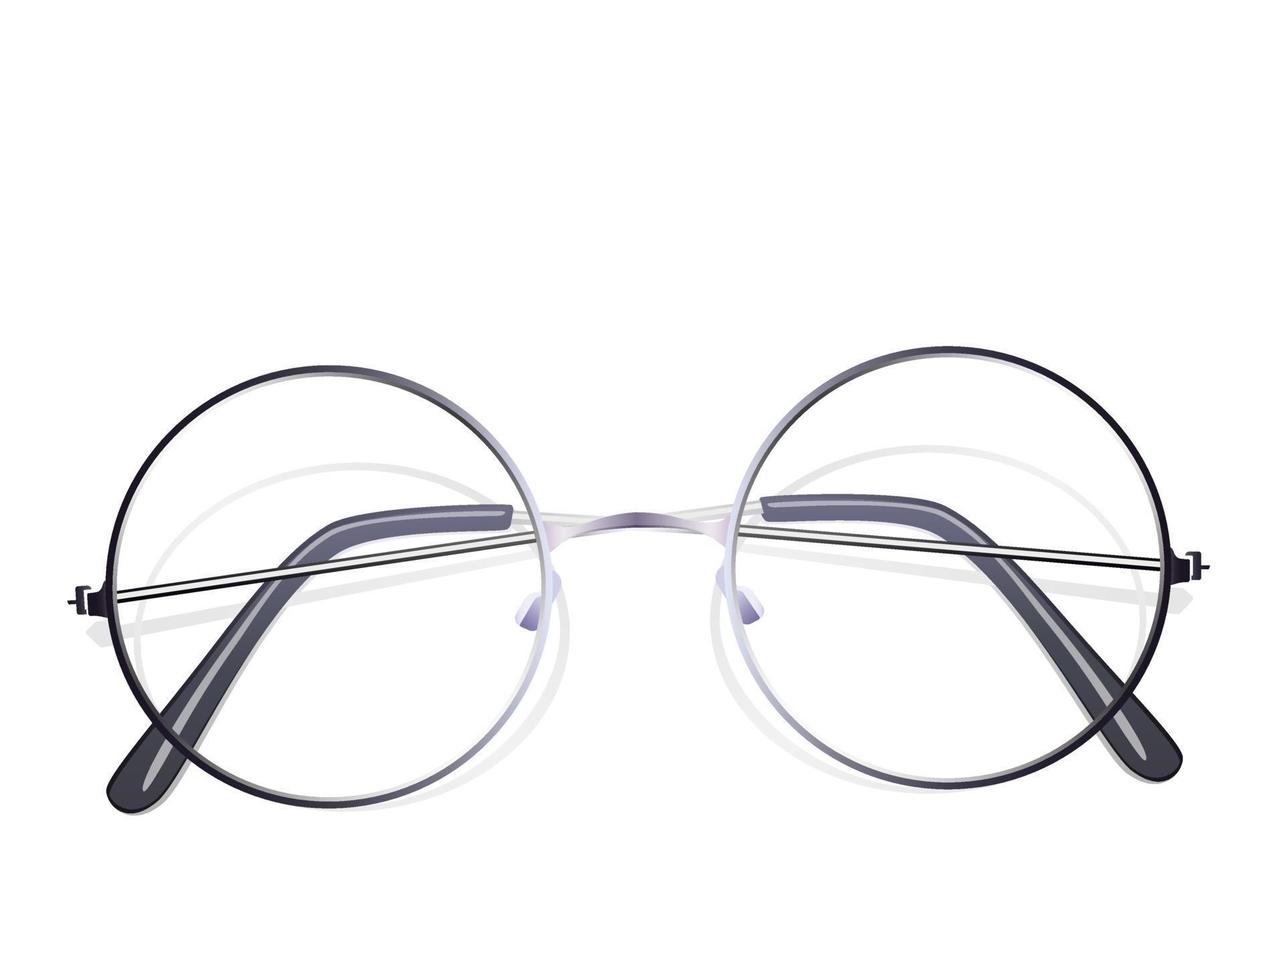 Glasses with lenses make perfect on a white background vector